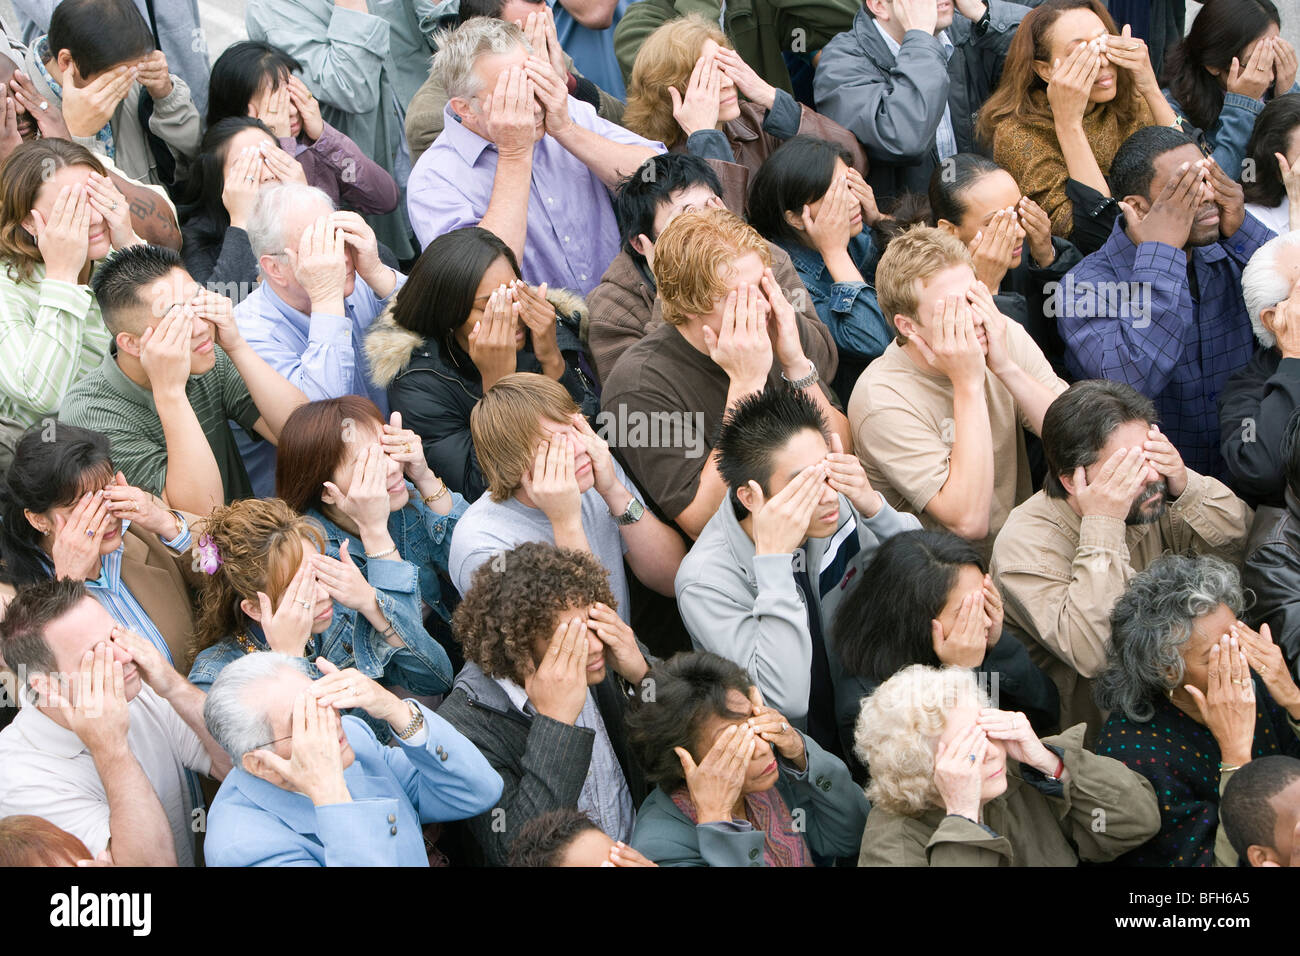 Crowd covering eyes Stock Photo